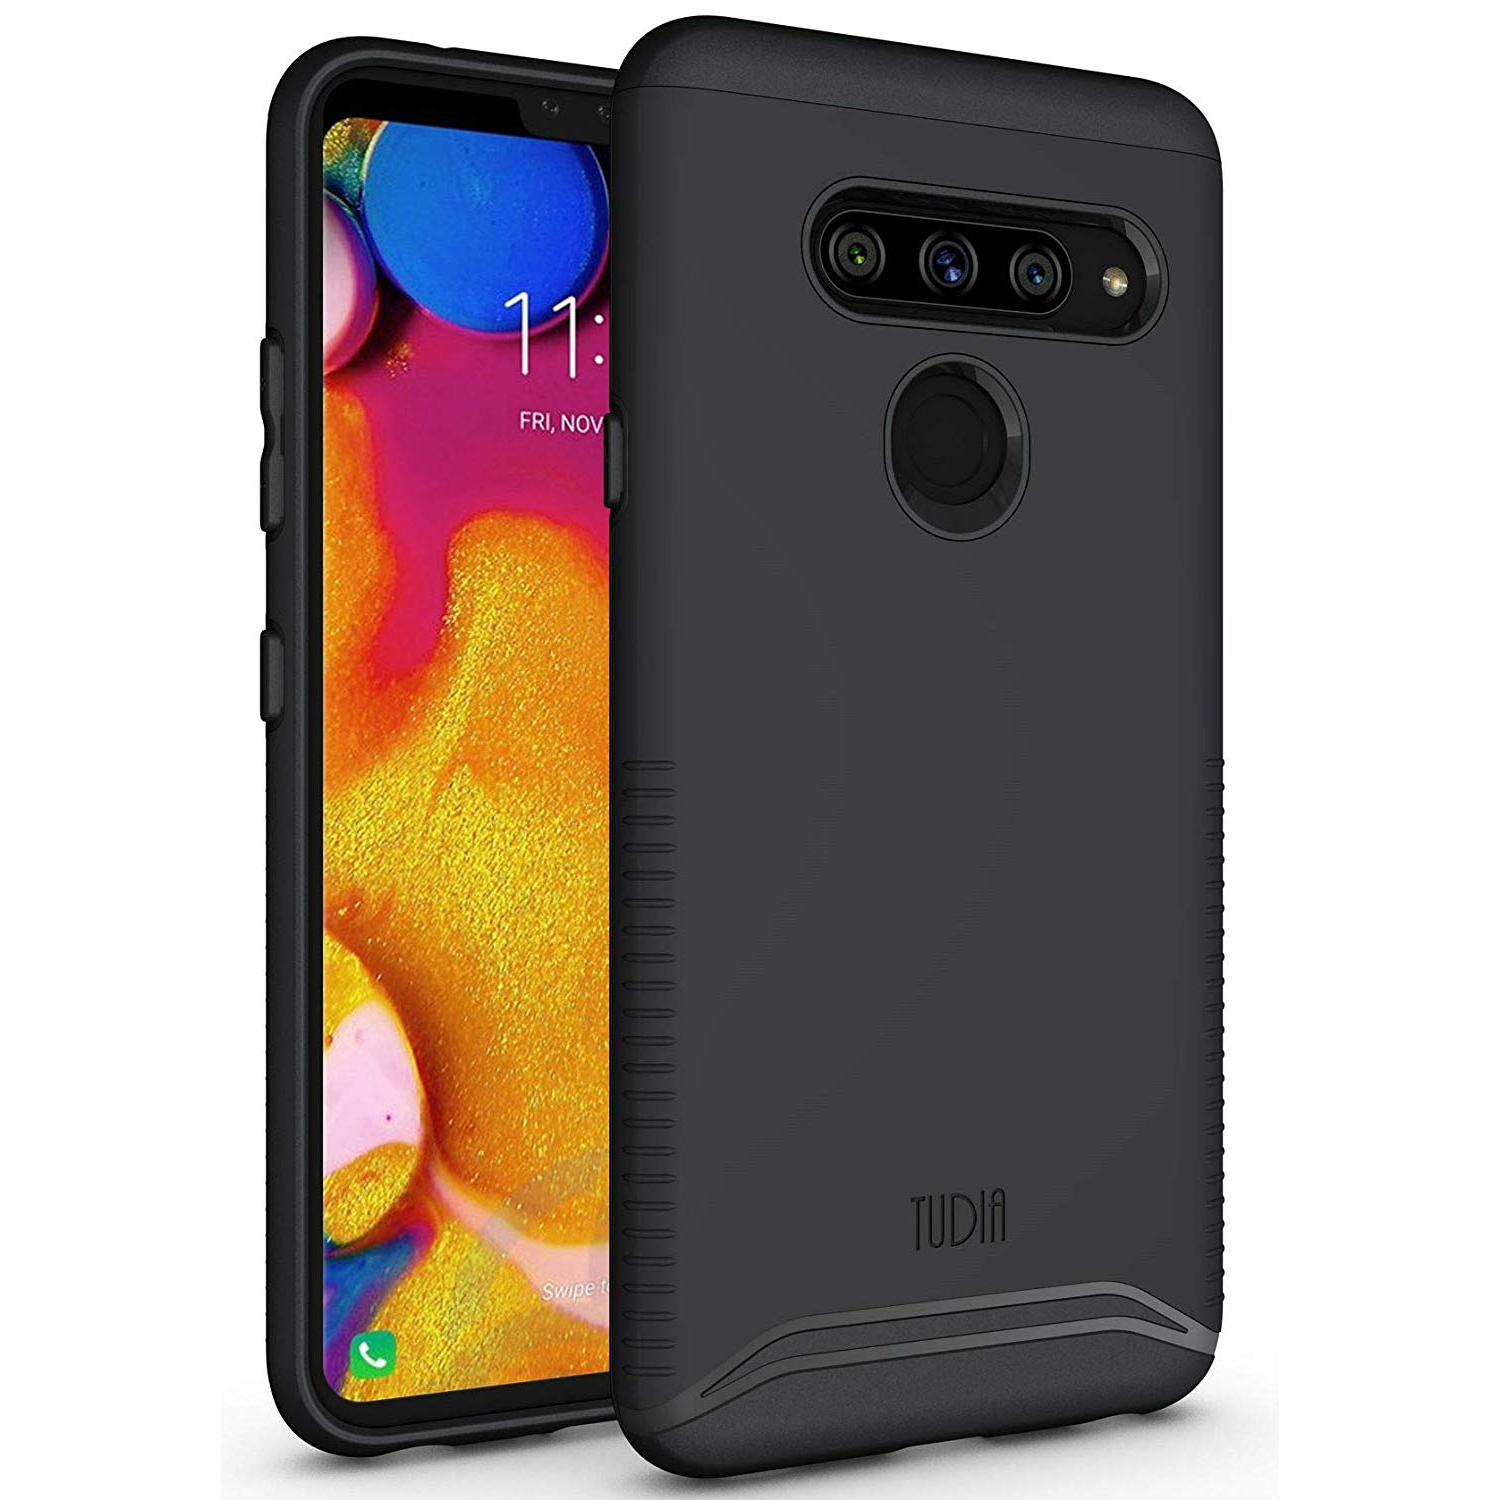 TUDIA Slim-Fit [Merge] Dual Layer Heavy Duty Drop Protection/Rugged Phone Case for LG V40 ThinQ (Matte Black)